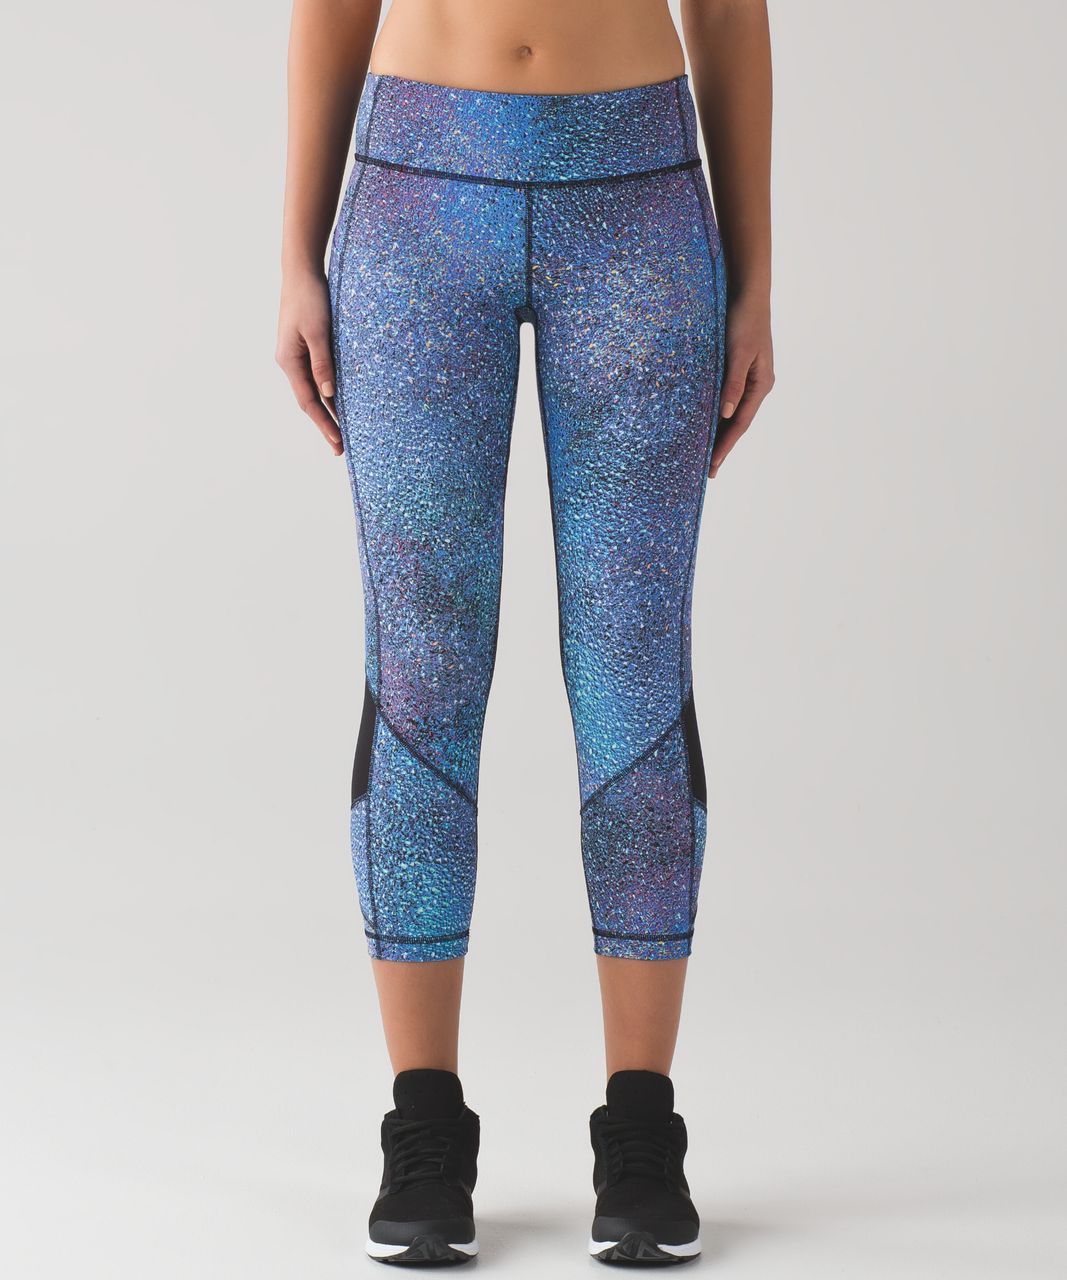 Lululemon Pace Rival High-Rise Crop 22 - Formation Camo Deep Coal Multi /  Black Size 4 - $75 (14% Off Retail) - From A